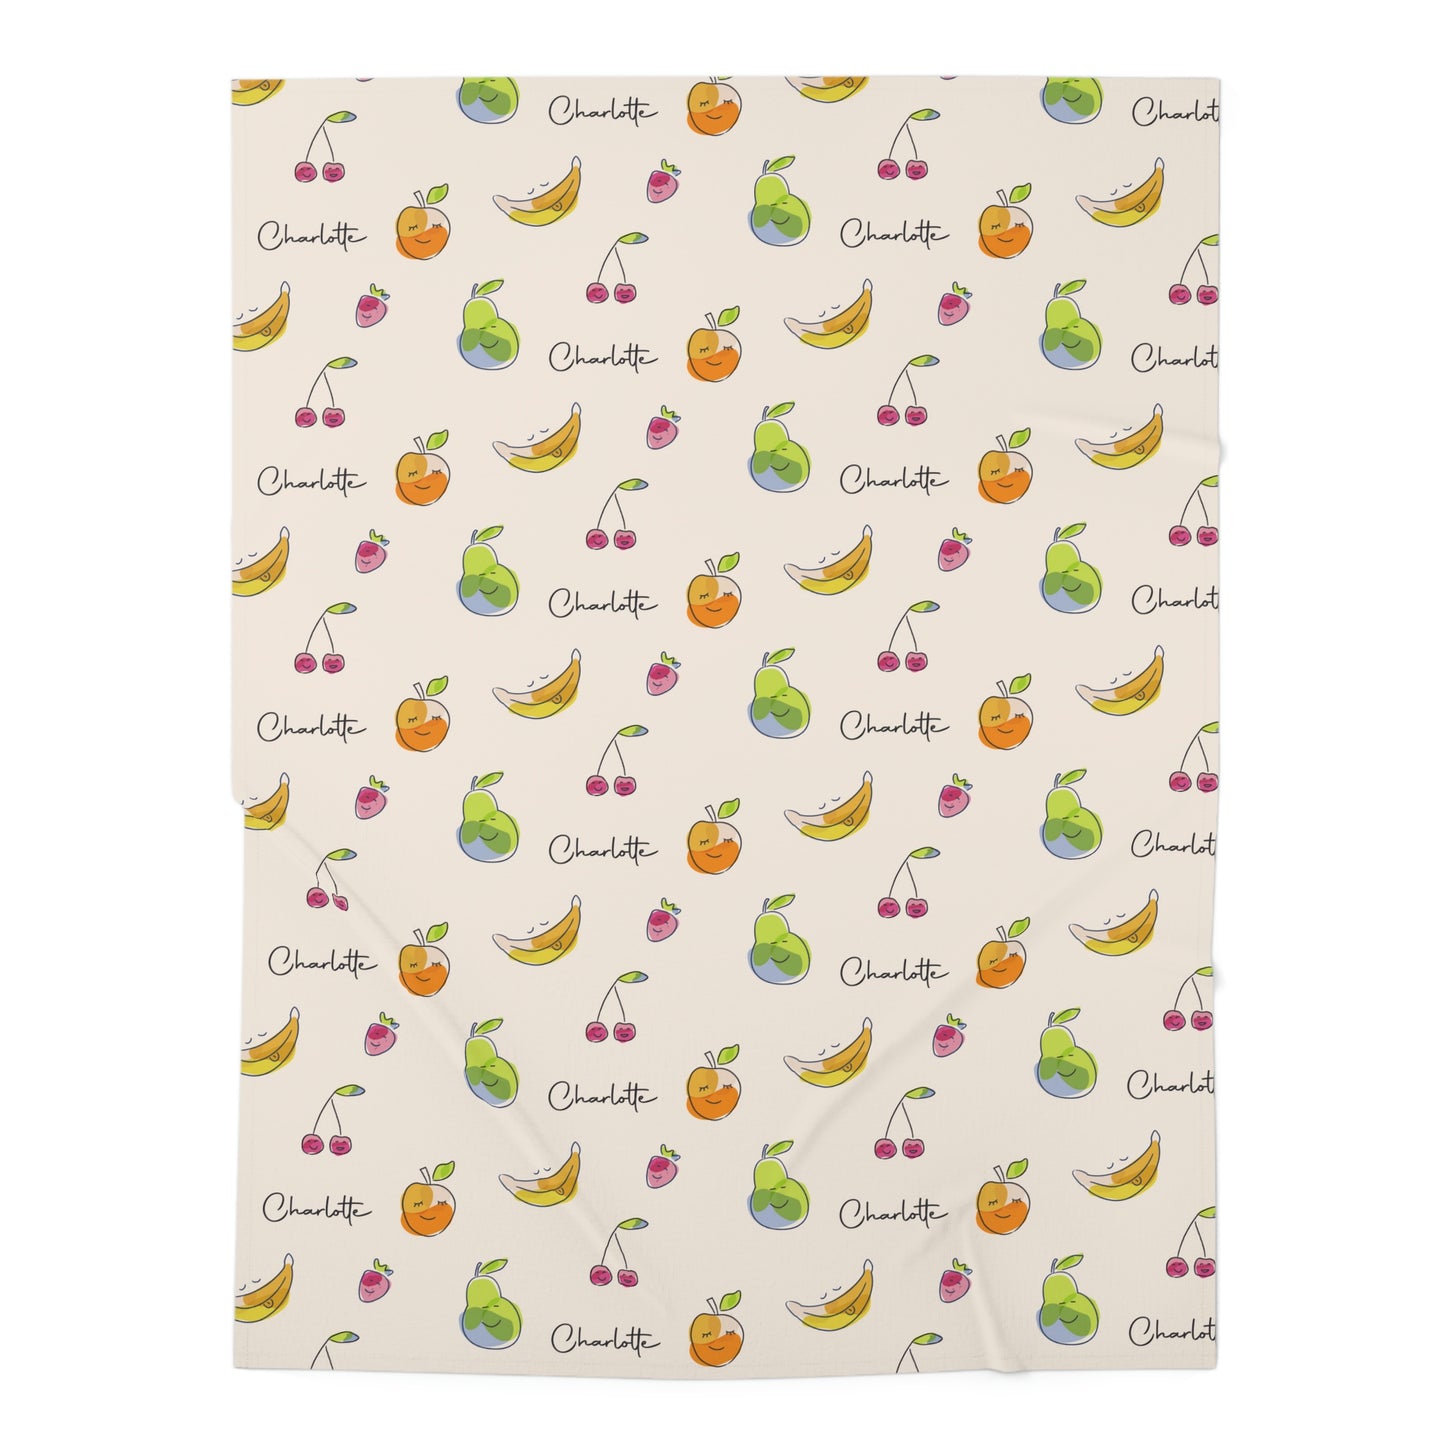 Jersey personalized baby blanket in happy fruit pattern laid flat